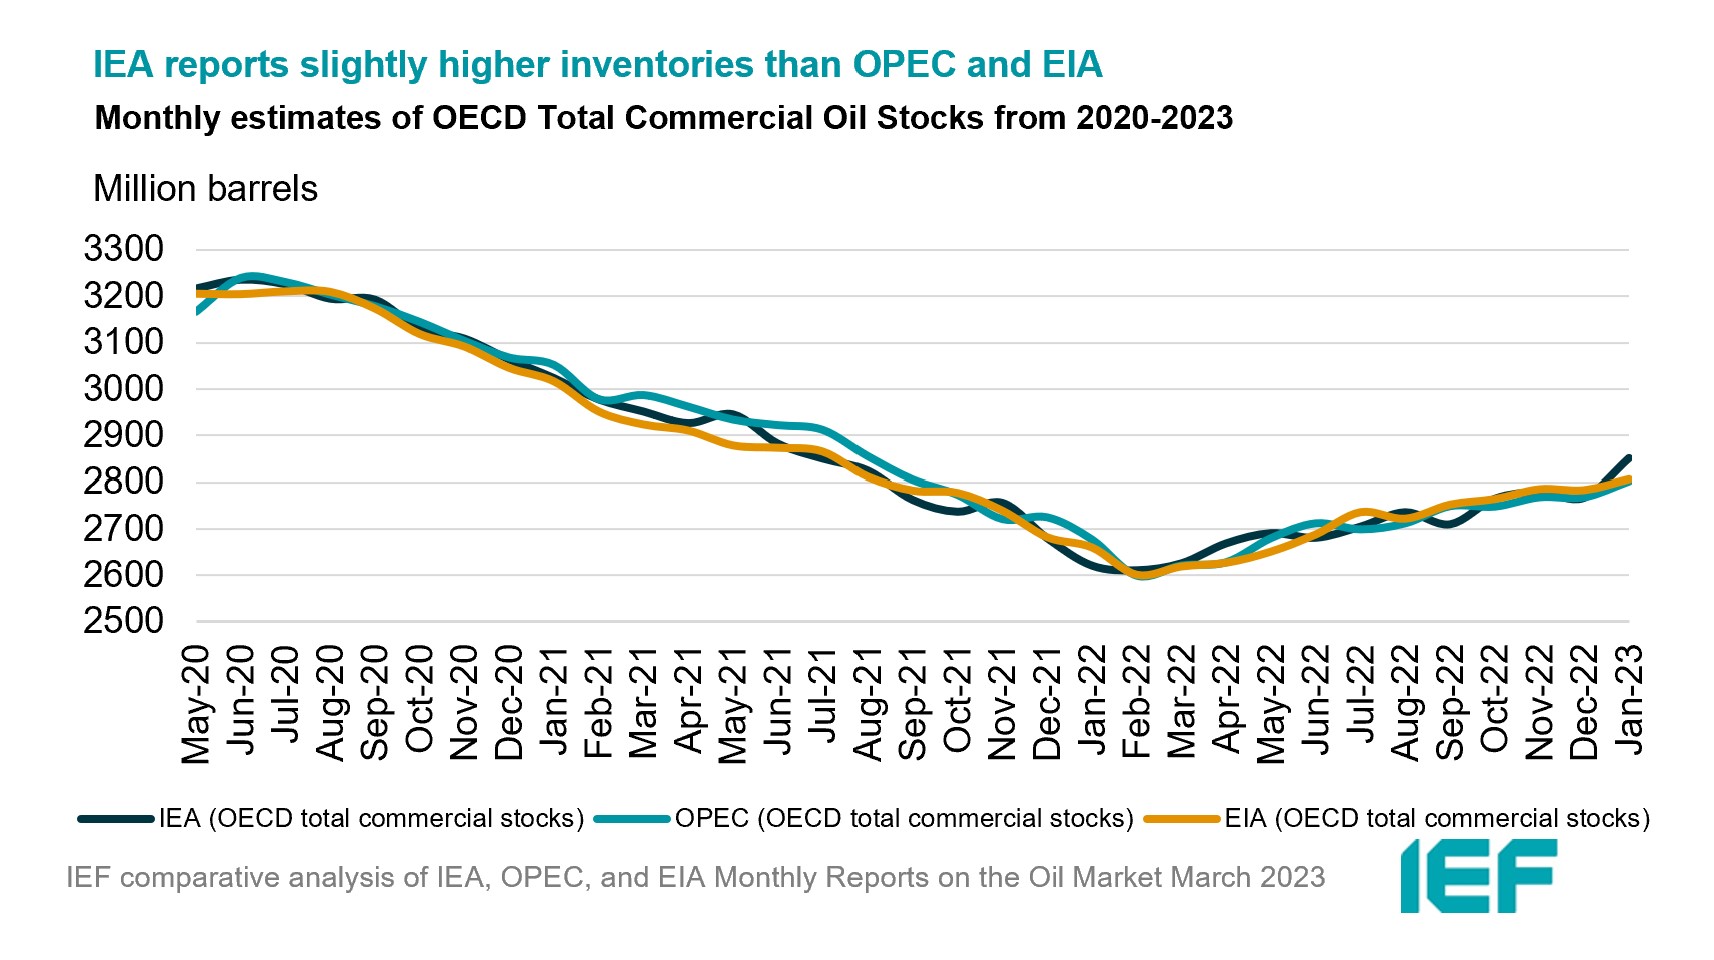 Chart: Monthly Estimates of OECD Total Commercial Oil Stocks